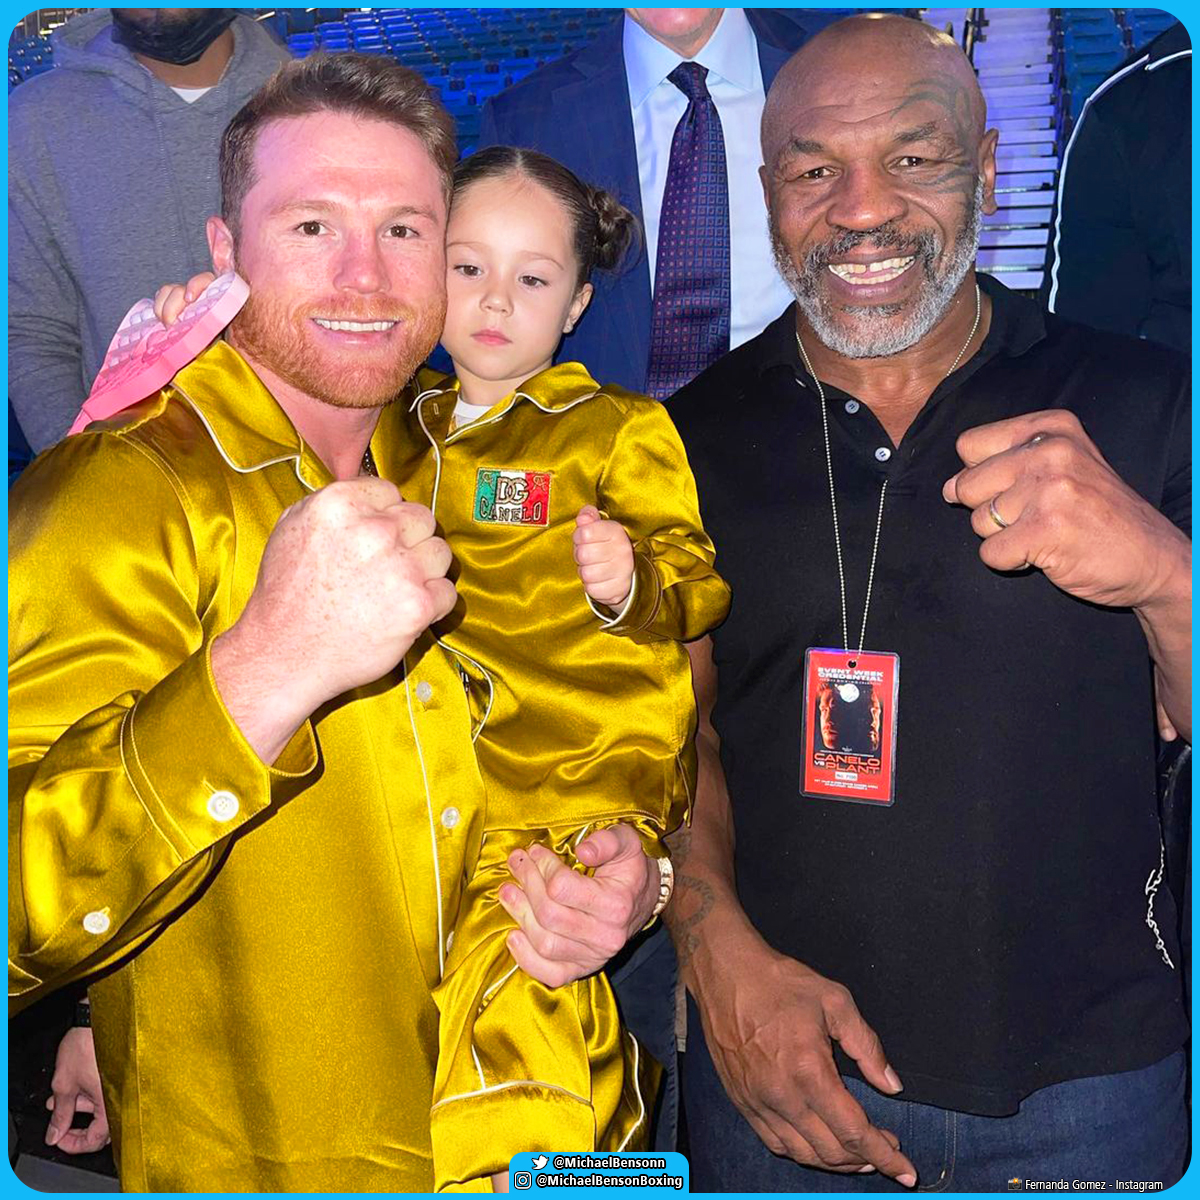 bao mike tyson suddenly surprised everyone by giving canelo alvarez a friend for his birthday and thanking him for helping him find himself 652e5af603099 Mike Tyson Suddenly Surprised Everyone By Giving Canelo Alvarez A Friend For His Birthday And Thanking Him For Helping Him Find Himself.